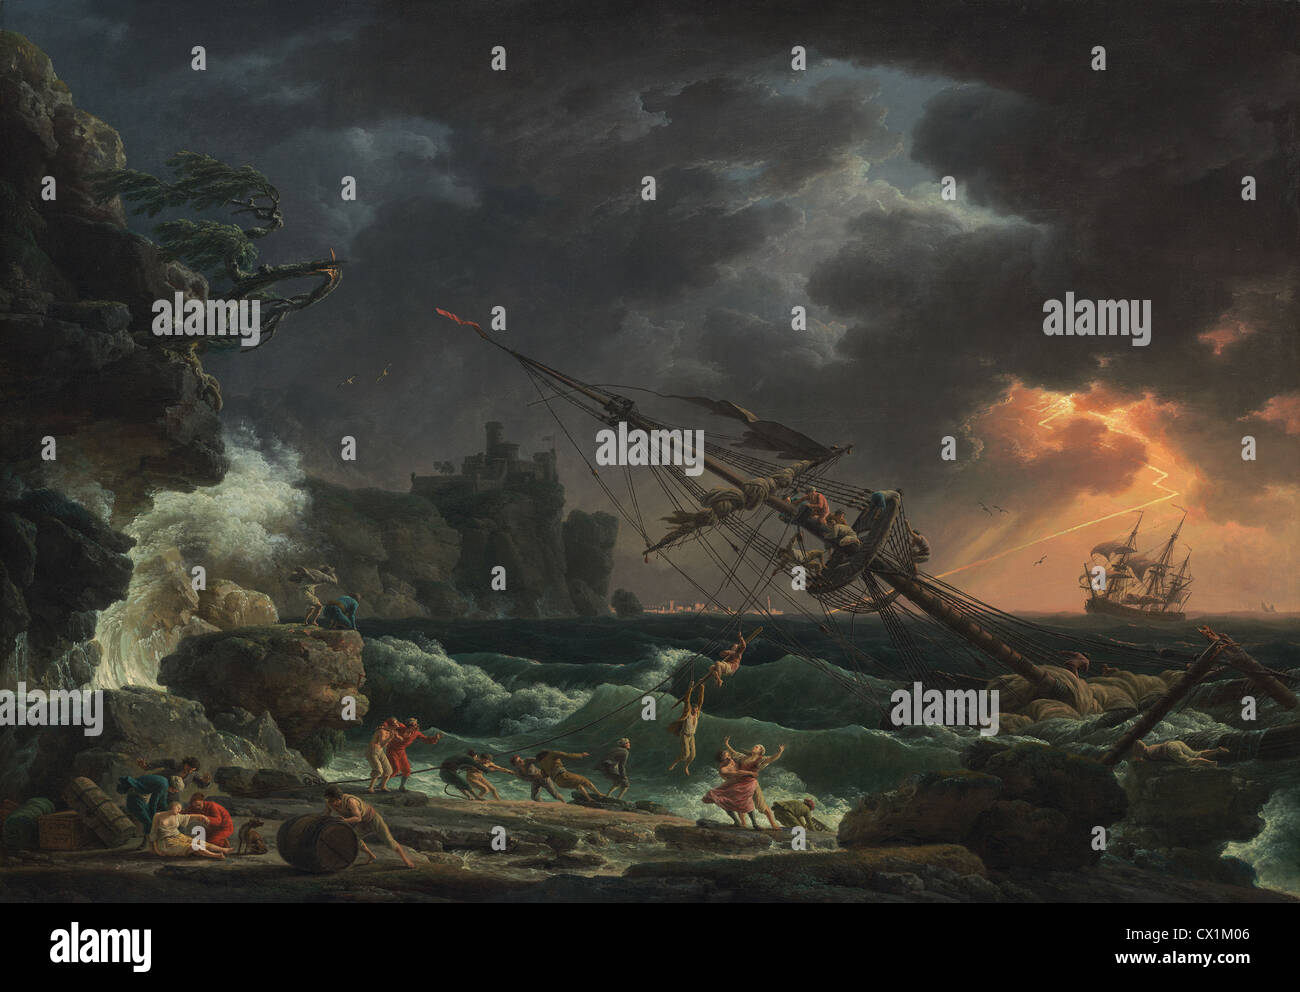 Claude-Joseph Vernet, The Shipwreck, French, 1714 - 1789, 1772, oil on canvas Stock Photo